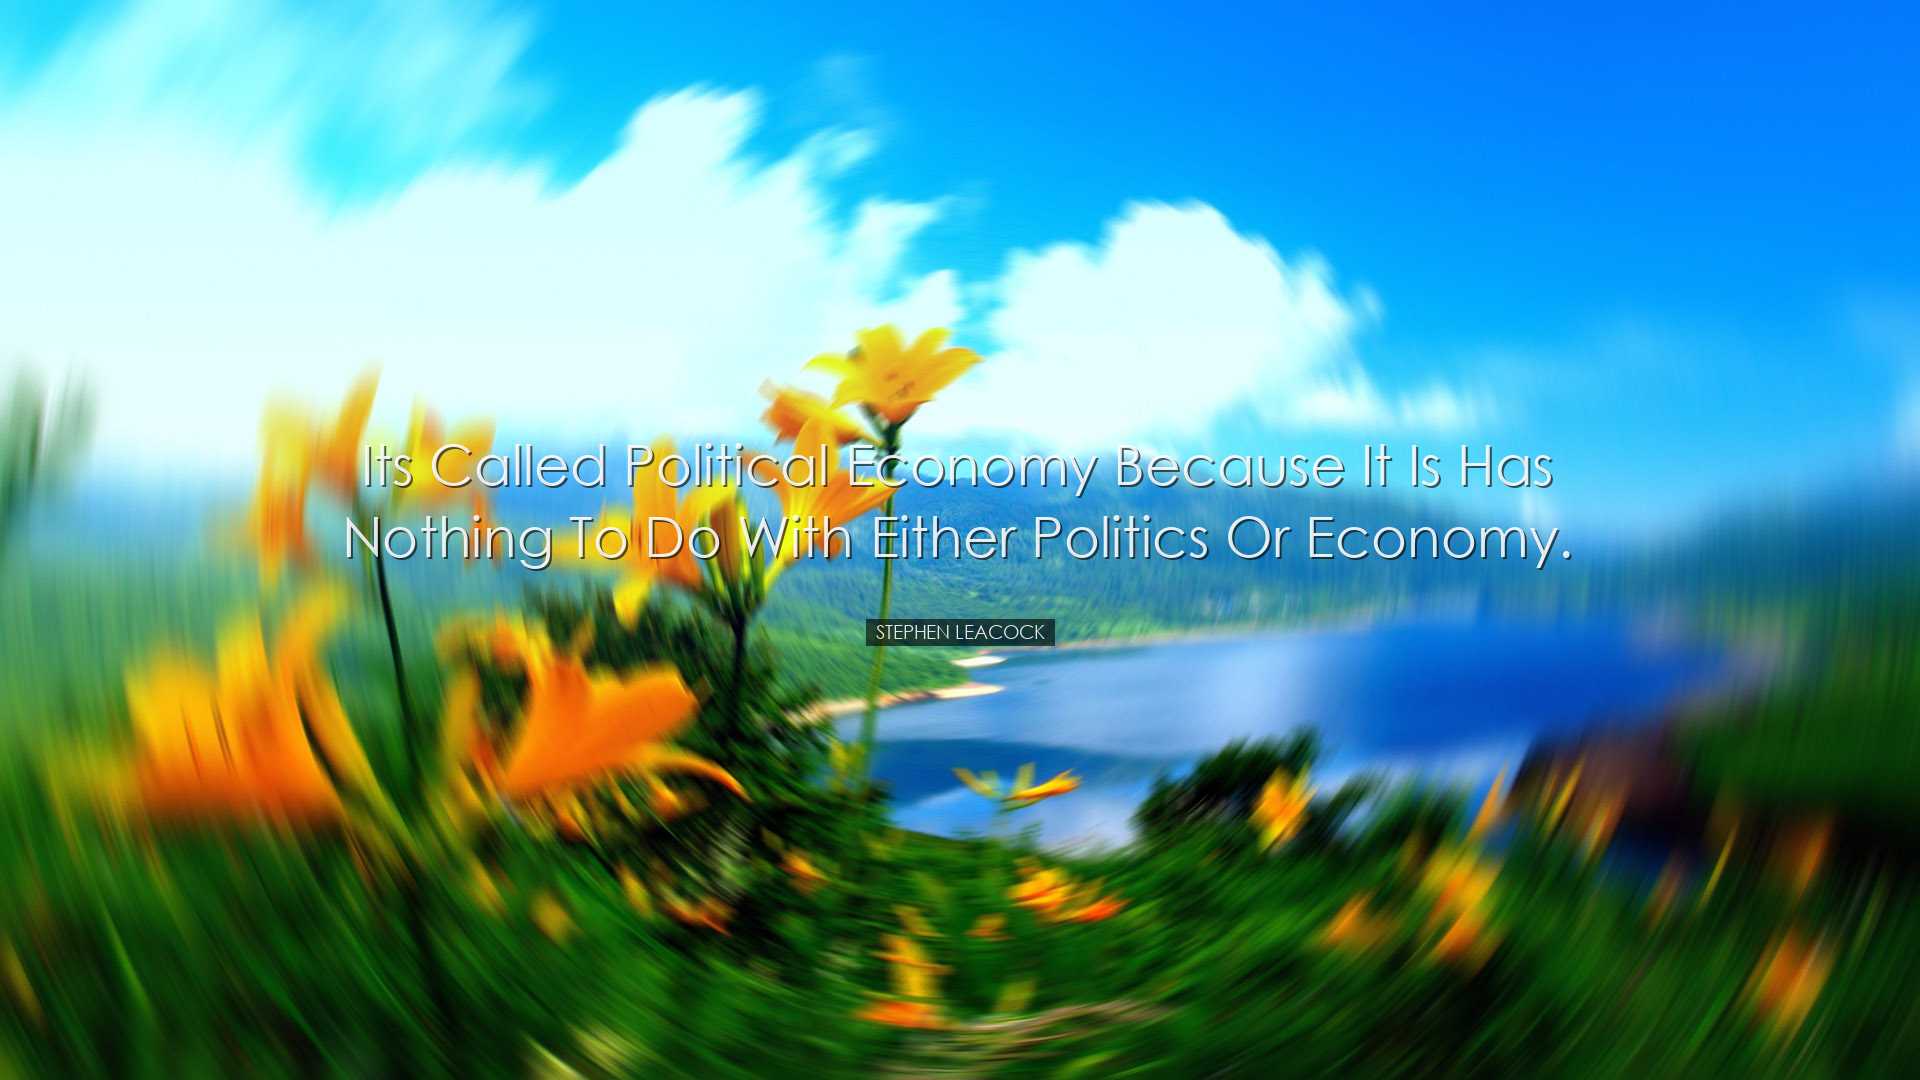 Its called political economy because it is has nothing to do with